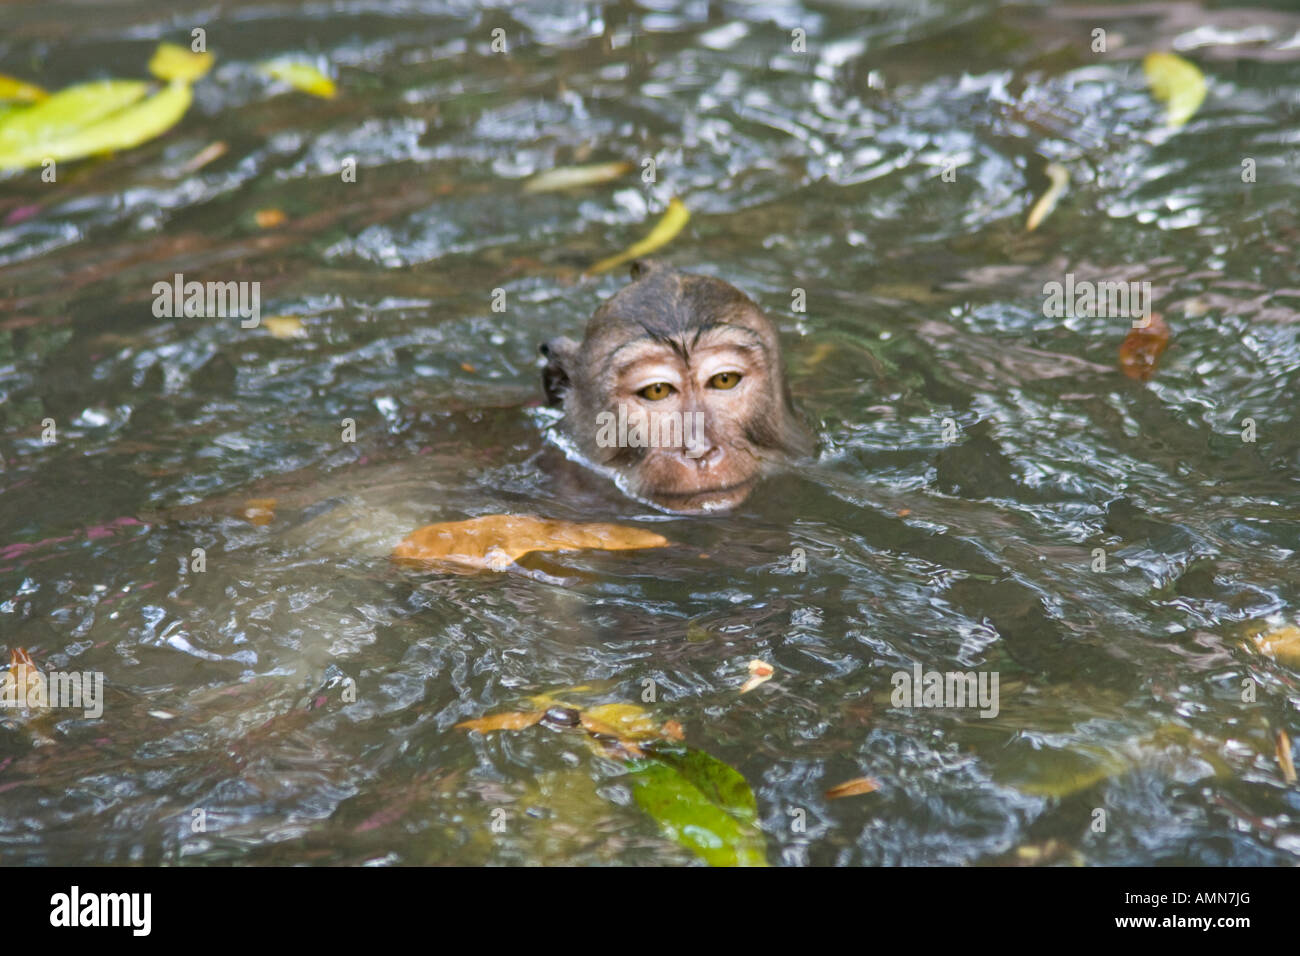 Swimming in Water Long Tailed Macaques Macaca Fascicularis Monkey Forest Ubud Bali Indonesia Stock Photo